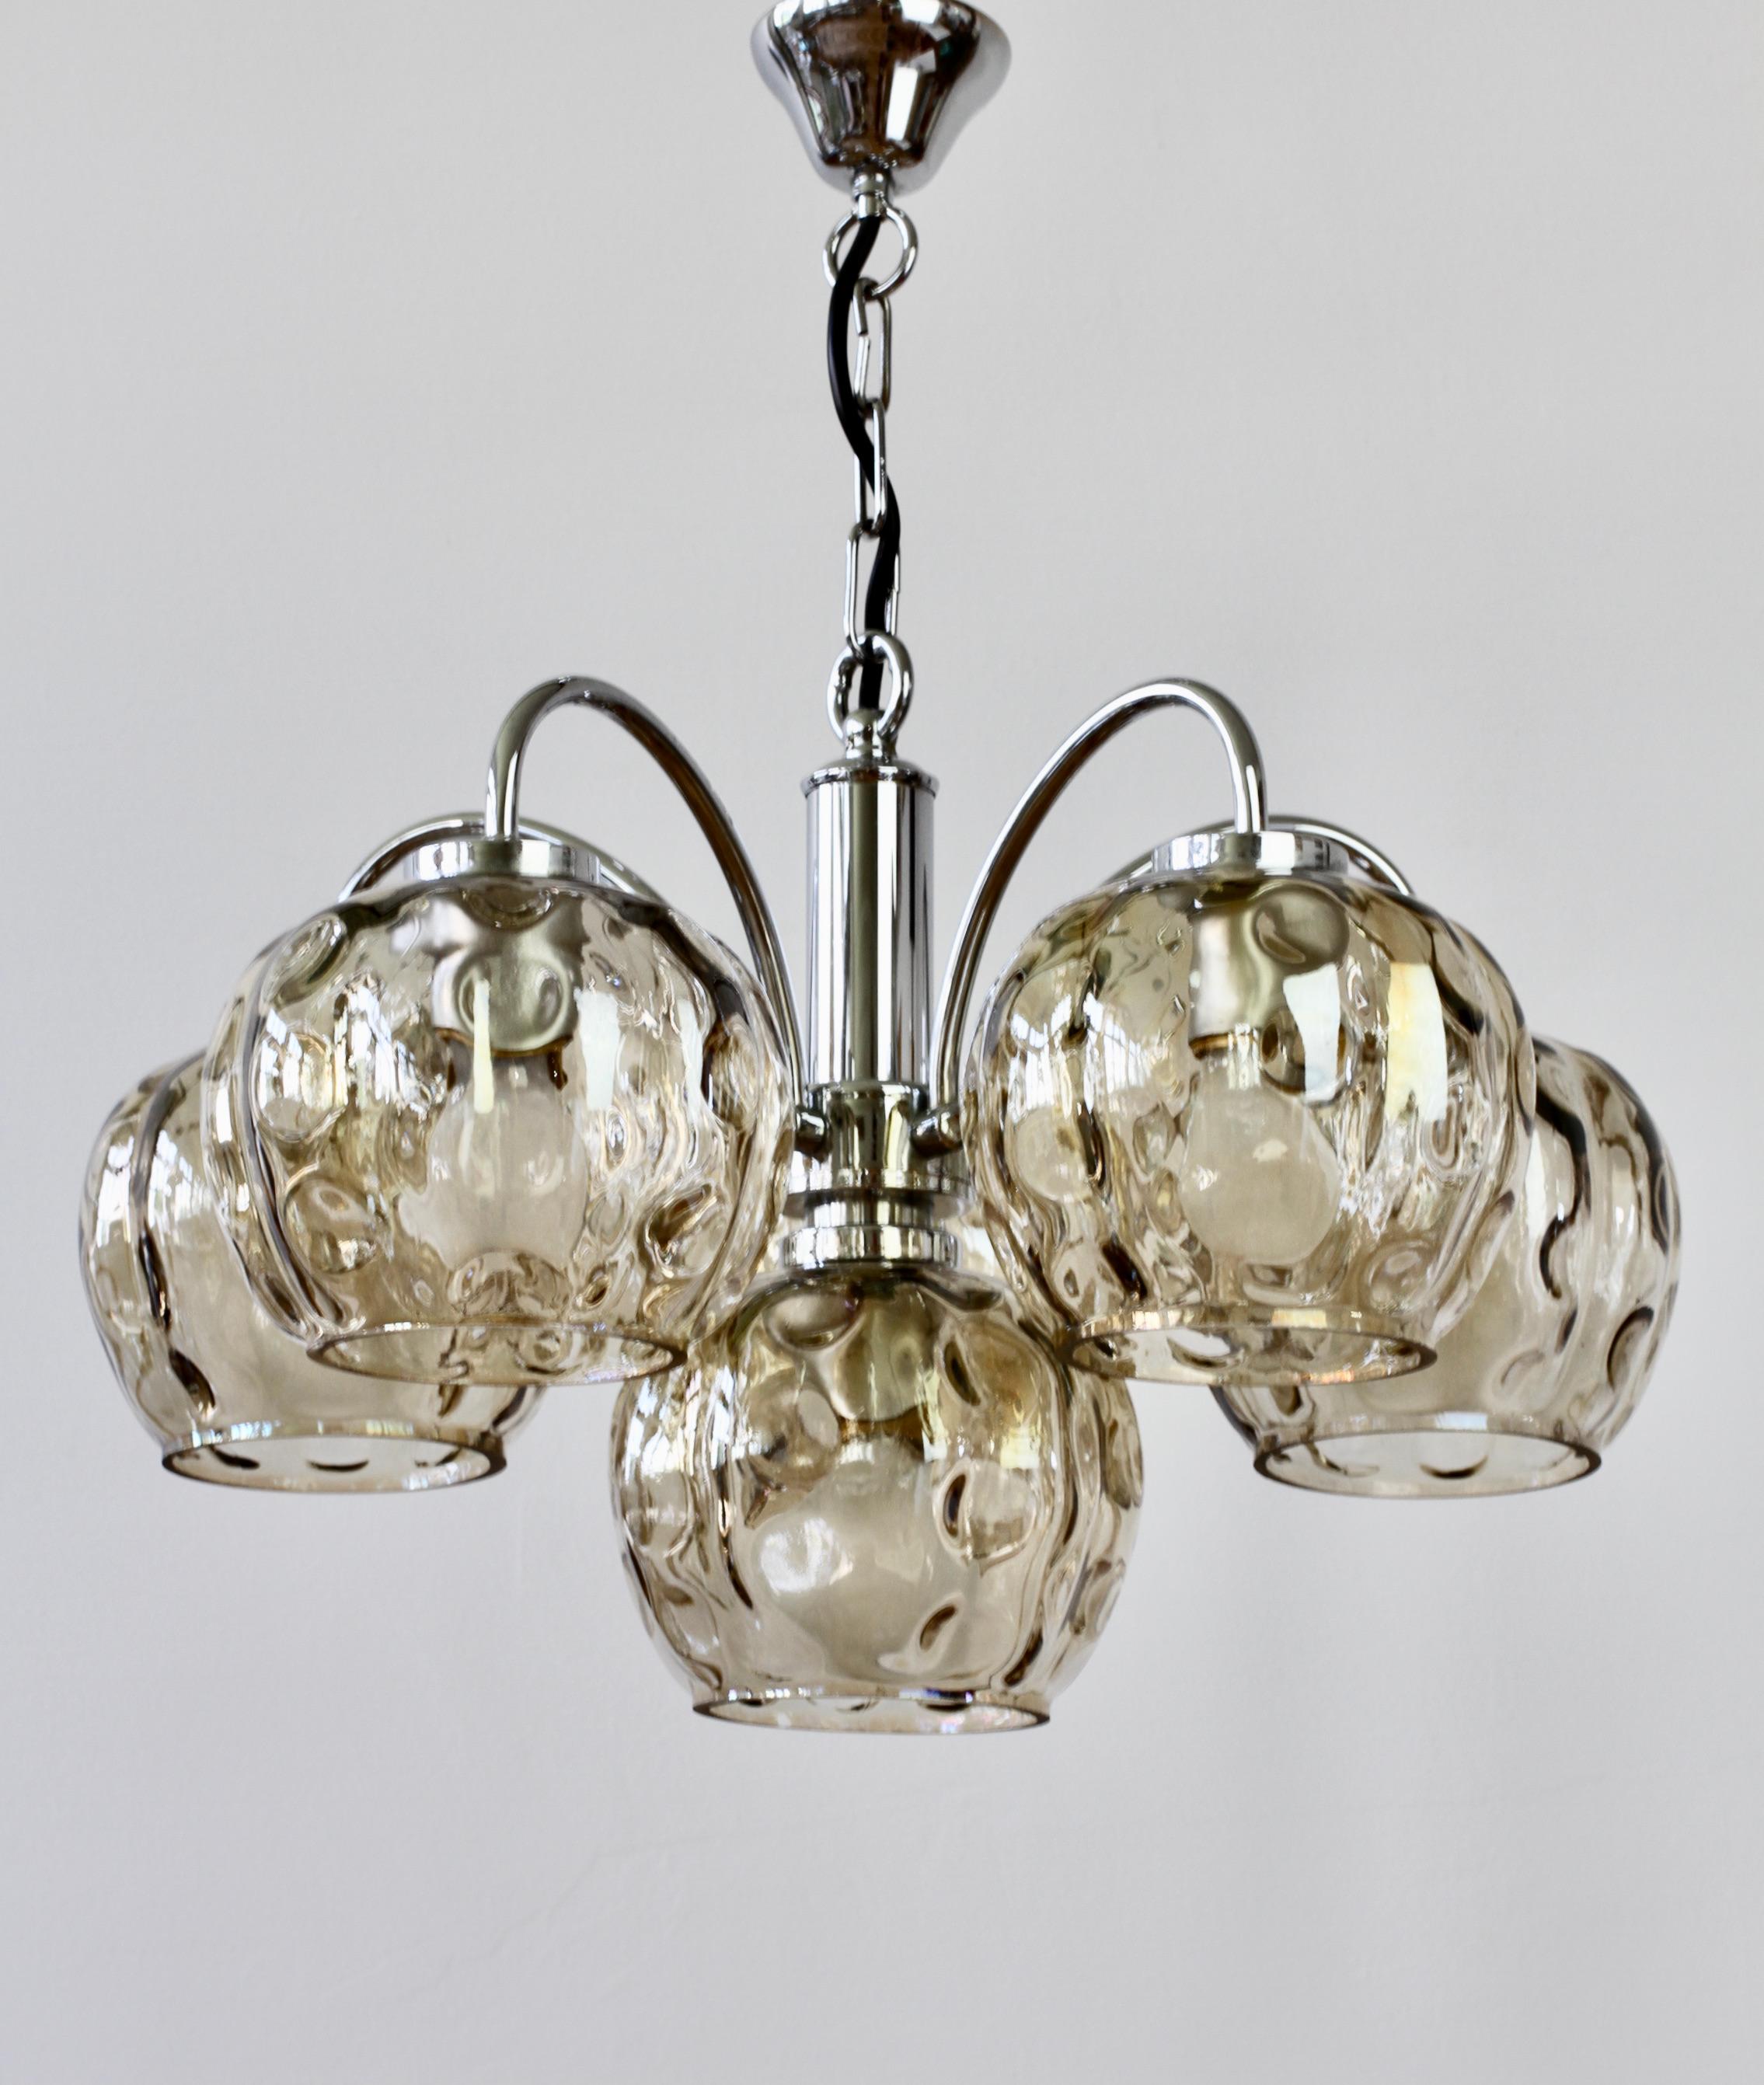 Polished 1970s Vintage Six Arm Chrome Chandelier with Smoked Toned 